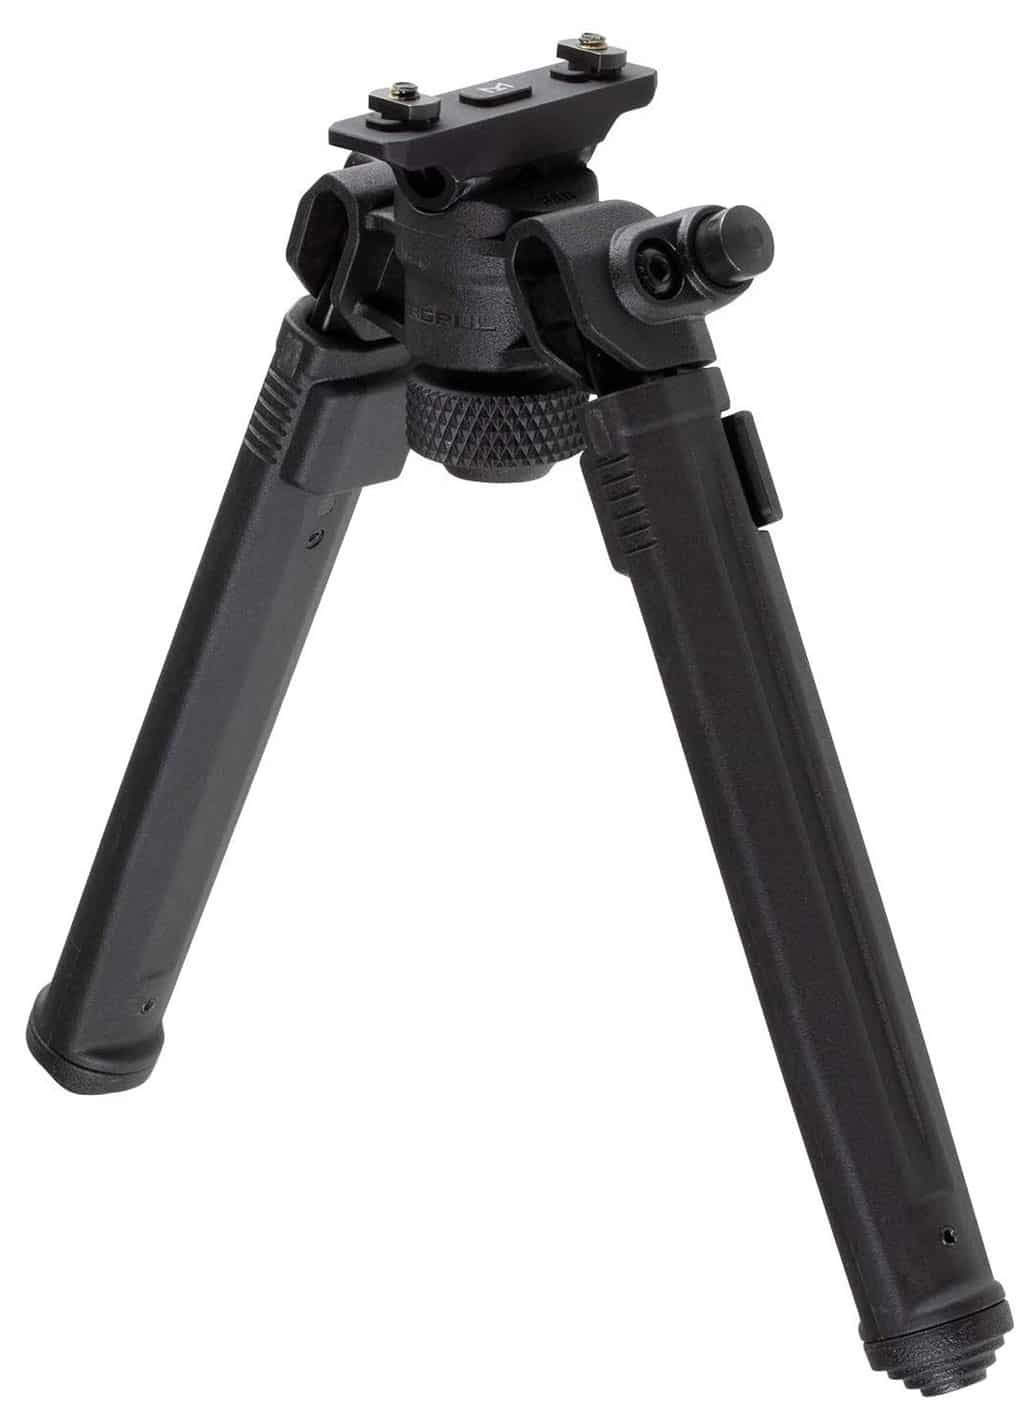 Magpul Rifle Bipod Gun Rest for Hunting and Shooting